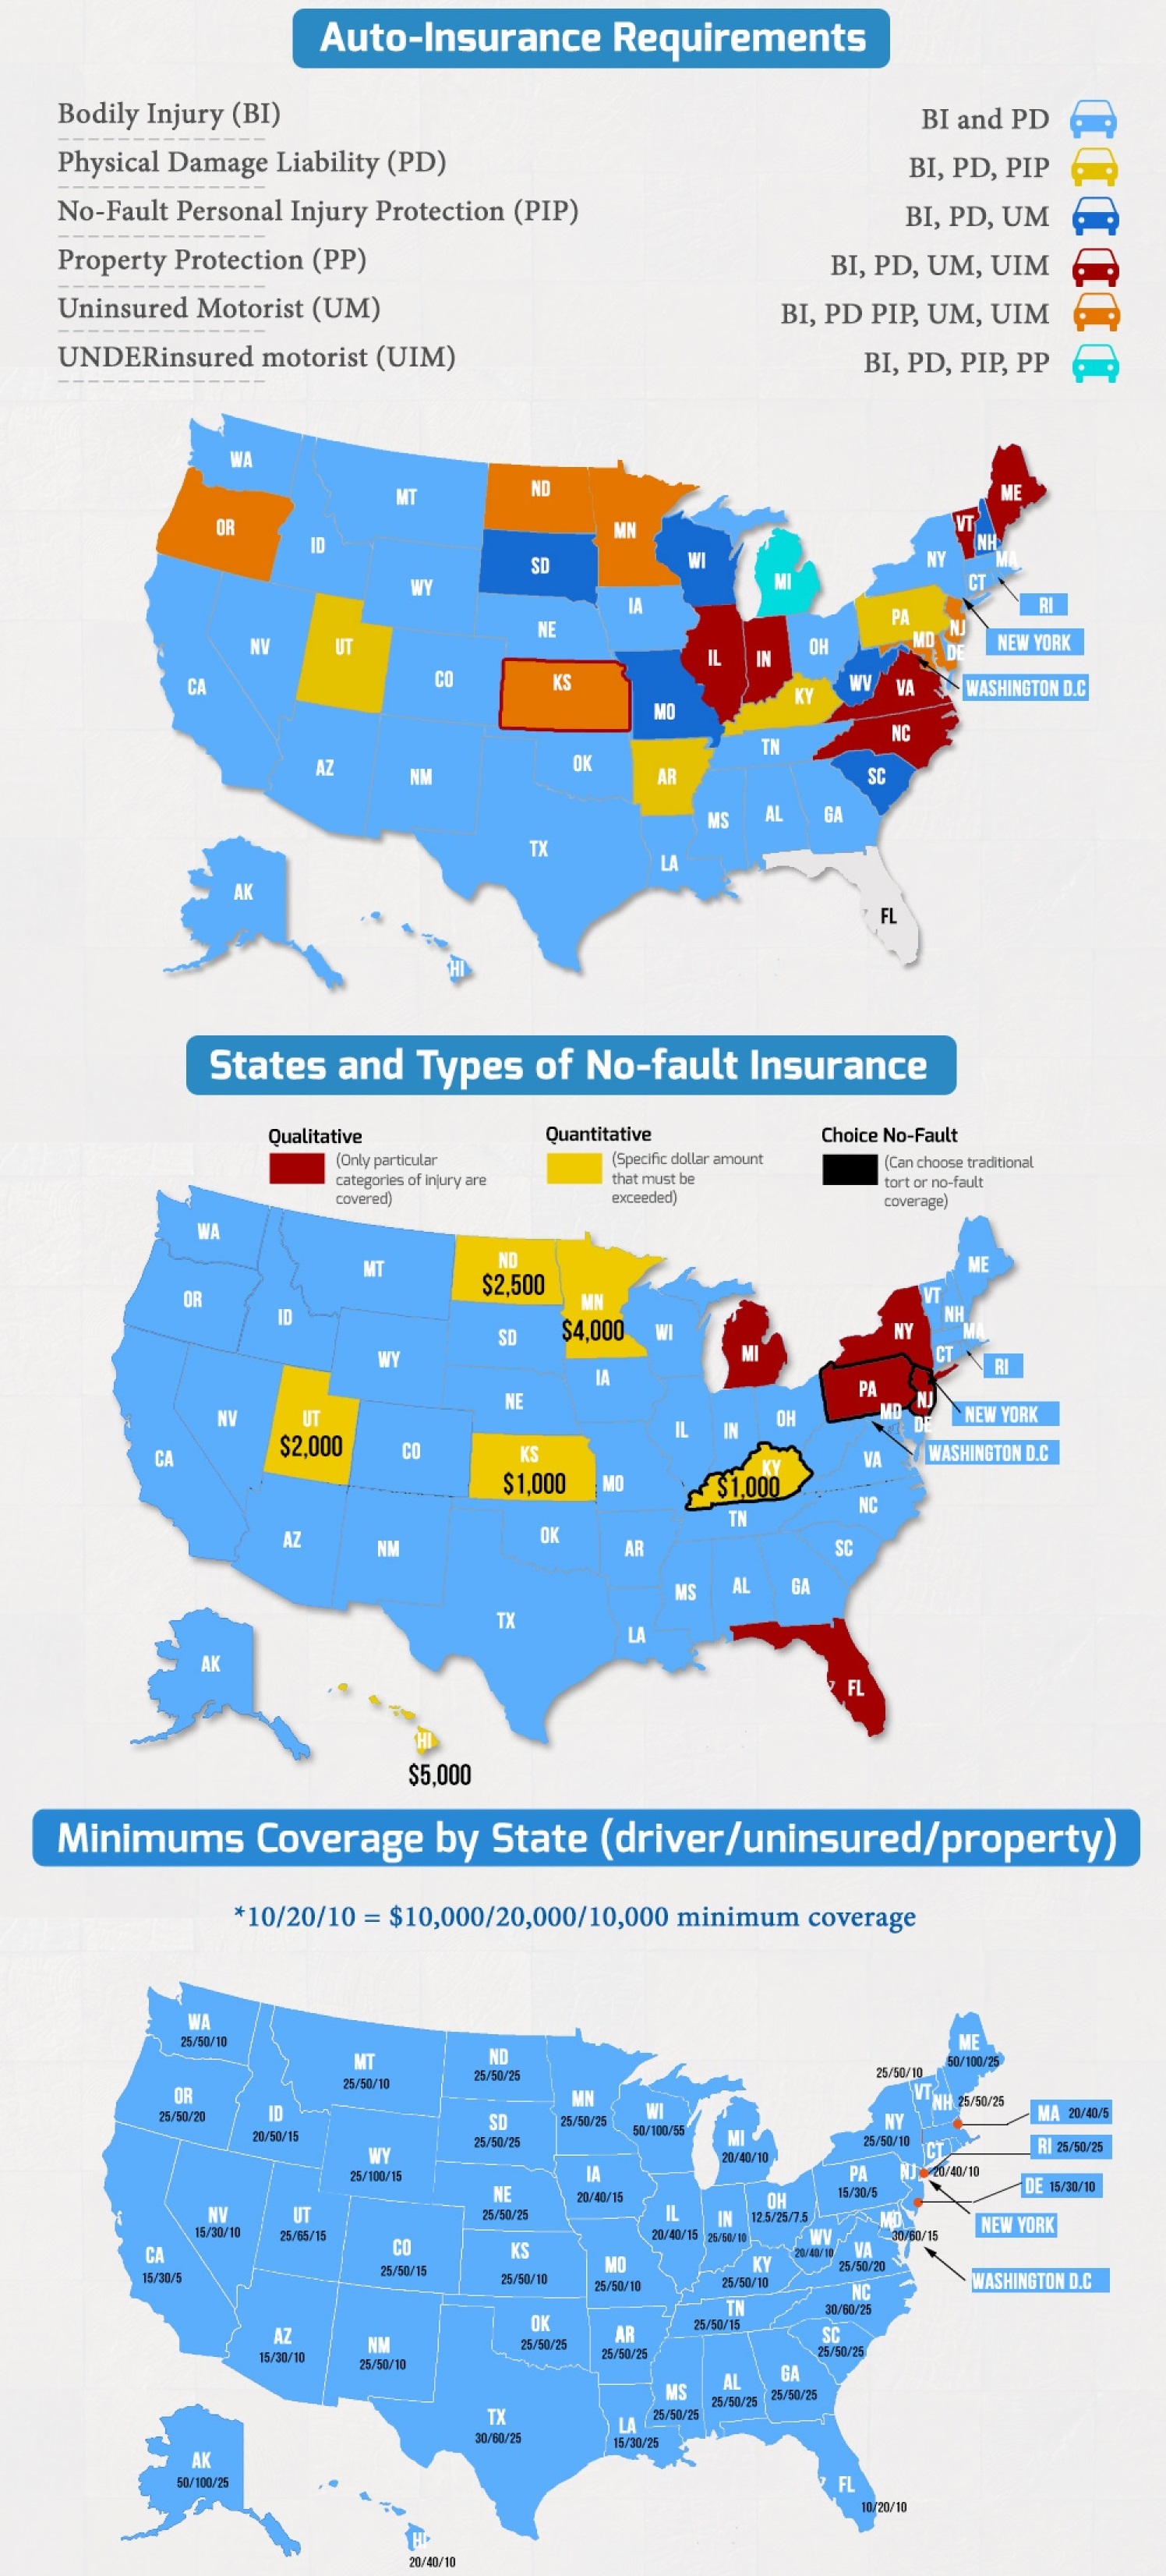 Insurance minimums by state